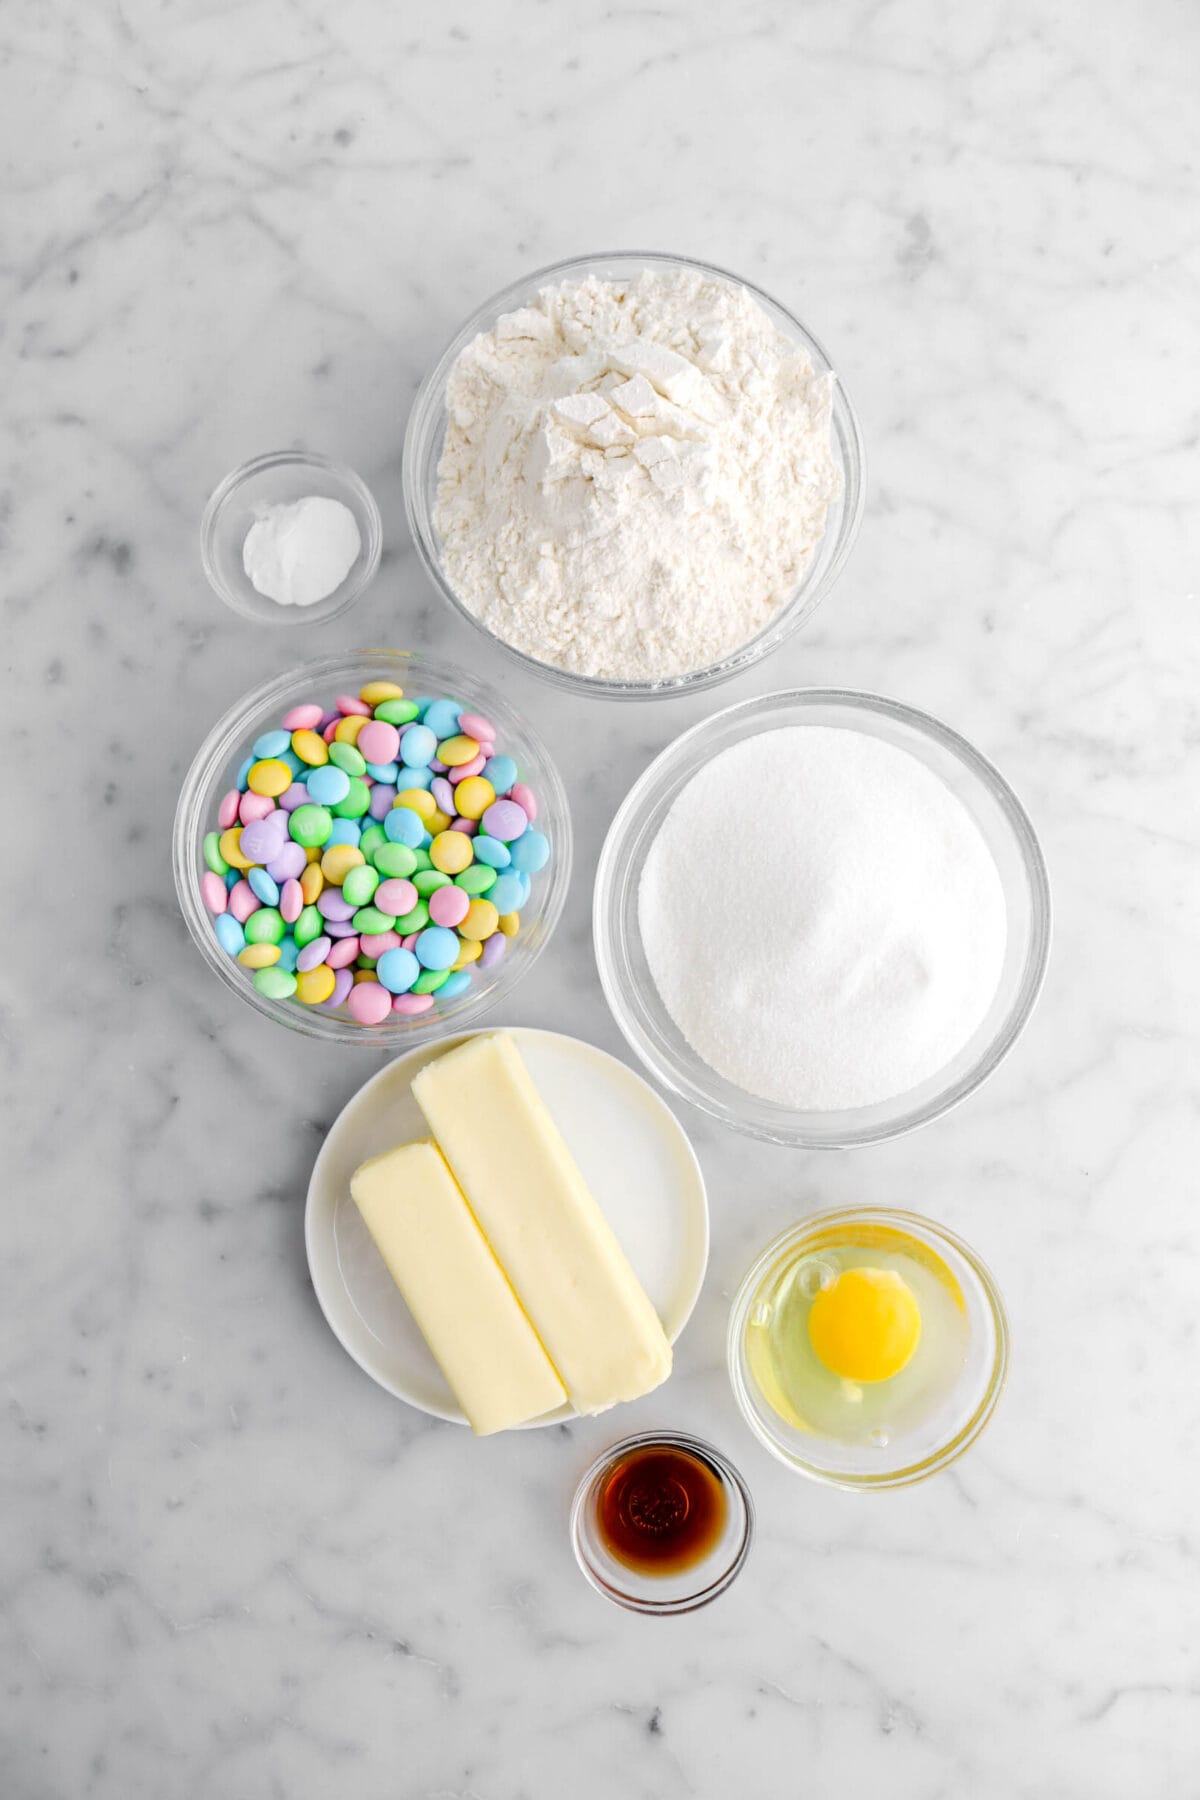 baking soda, flour, pastel M&M's, sugar, butter, egg, and vanilla on marble surface.